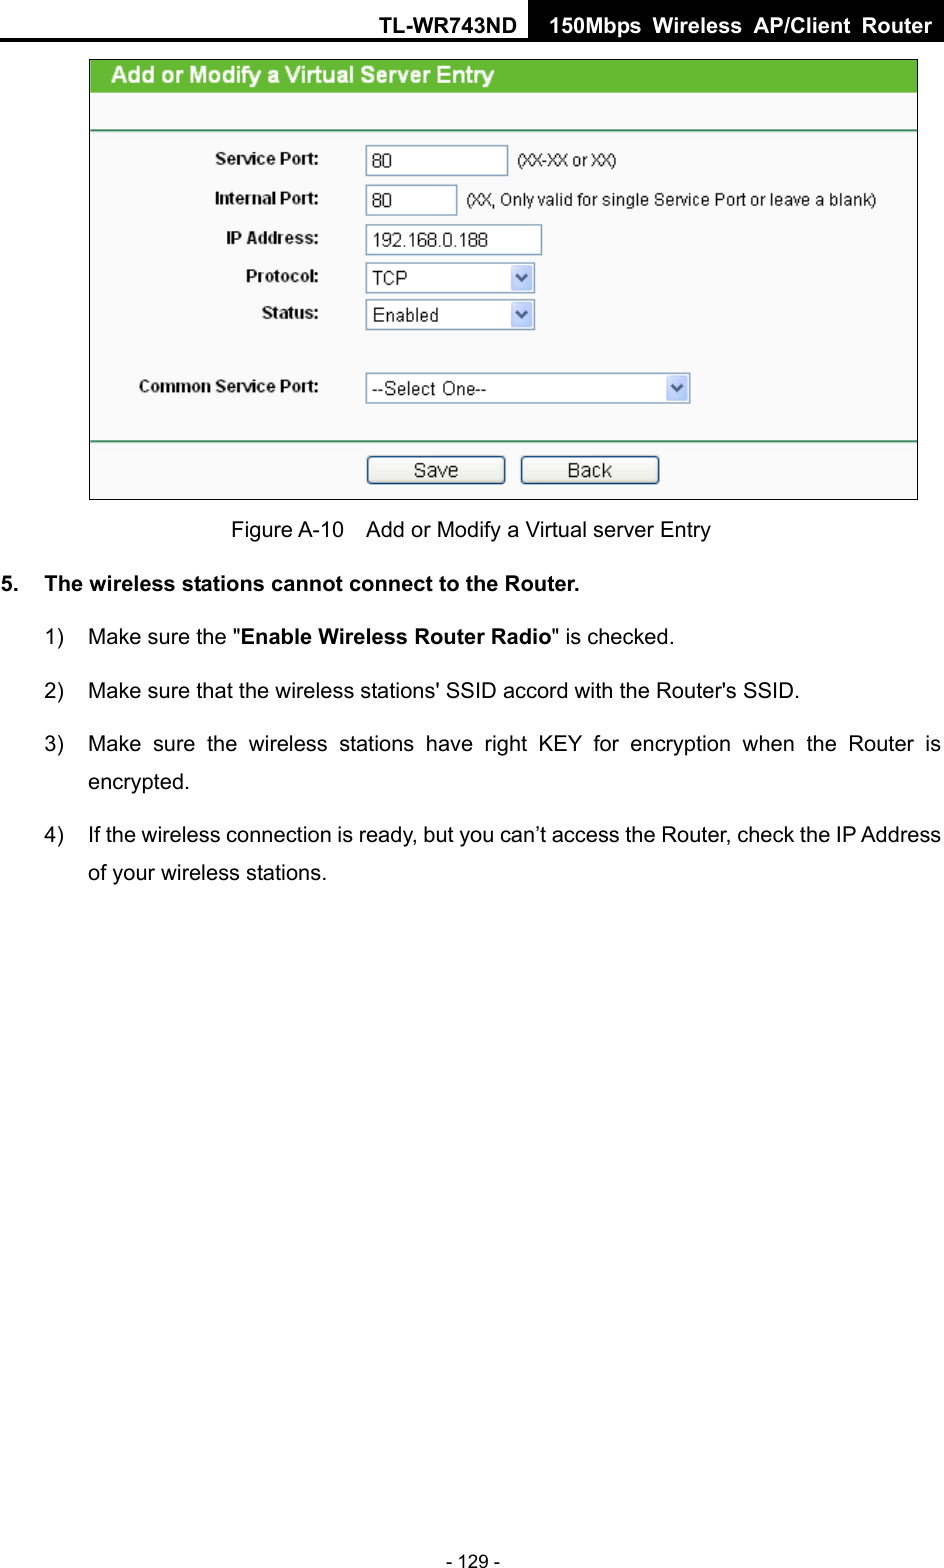 TL-WR743ND 150Mbps Wireless AP/Client Router - 129 -  Figure A-10    Add or Modify a Virtual server Entry 5.  The wireless stations cannot connect to the Router. 1)  Make sure the &quot;Enable Wireless Router Radio&quot; is checked. 2)  Make sure that the wireless stations&apos; SSID accord with the Router&apos;s SSID. 3)  Make sure the wireless stations have right KEY for encryption when the Router is encrypted. 4)  If the wireless connection is ready, but you can’t access the Router, check the IP Address of your wireless stations. 